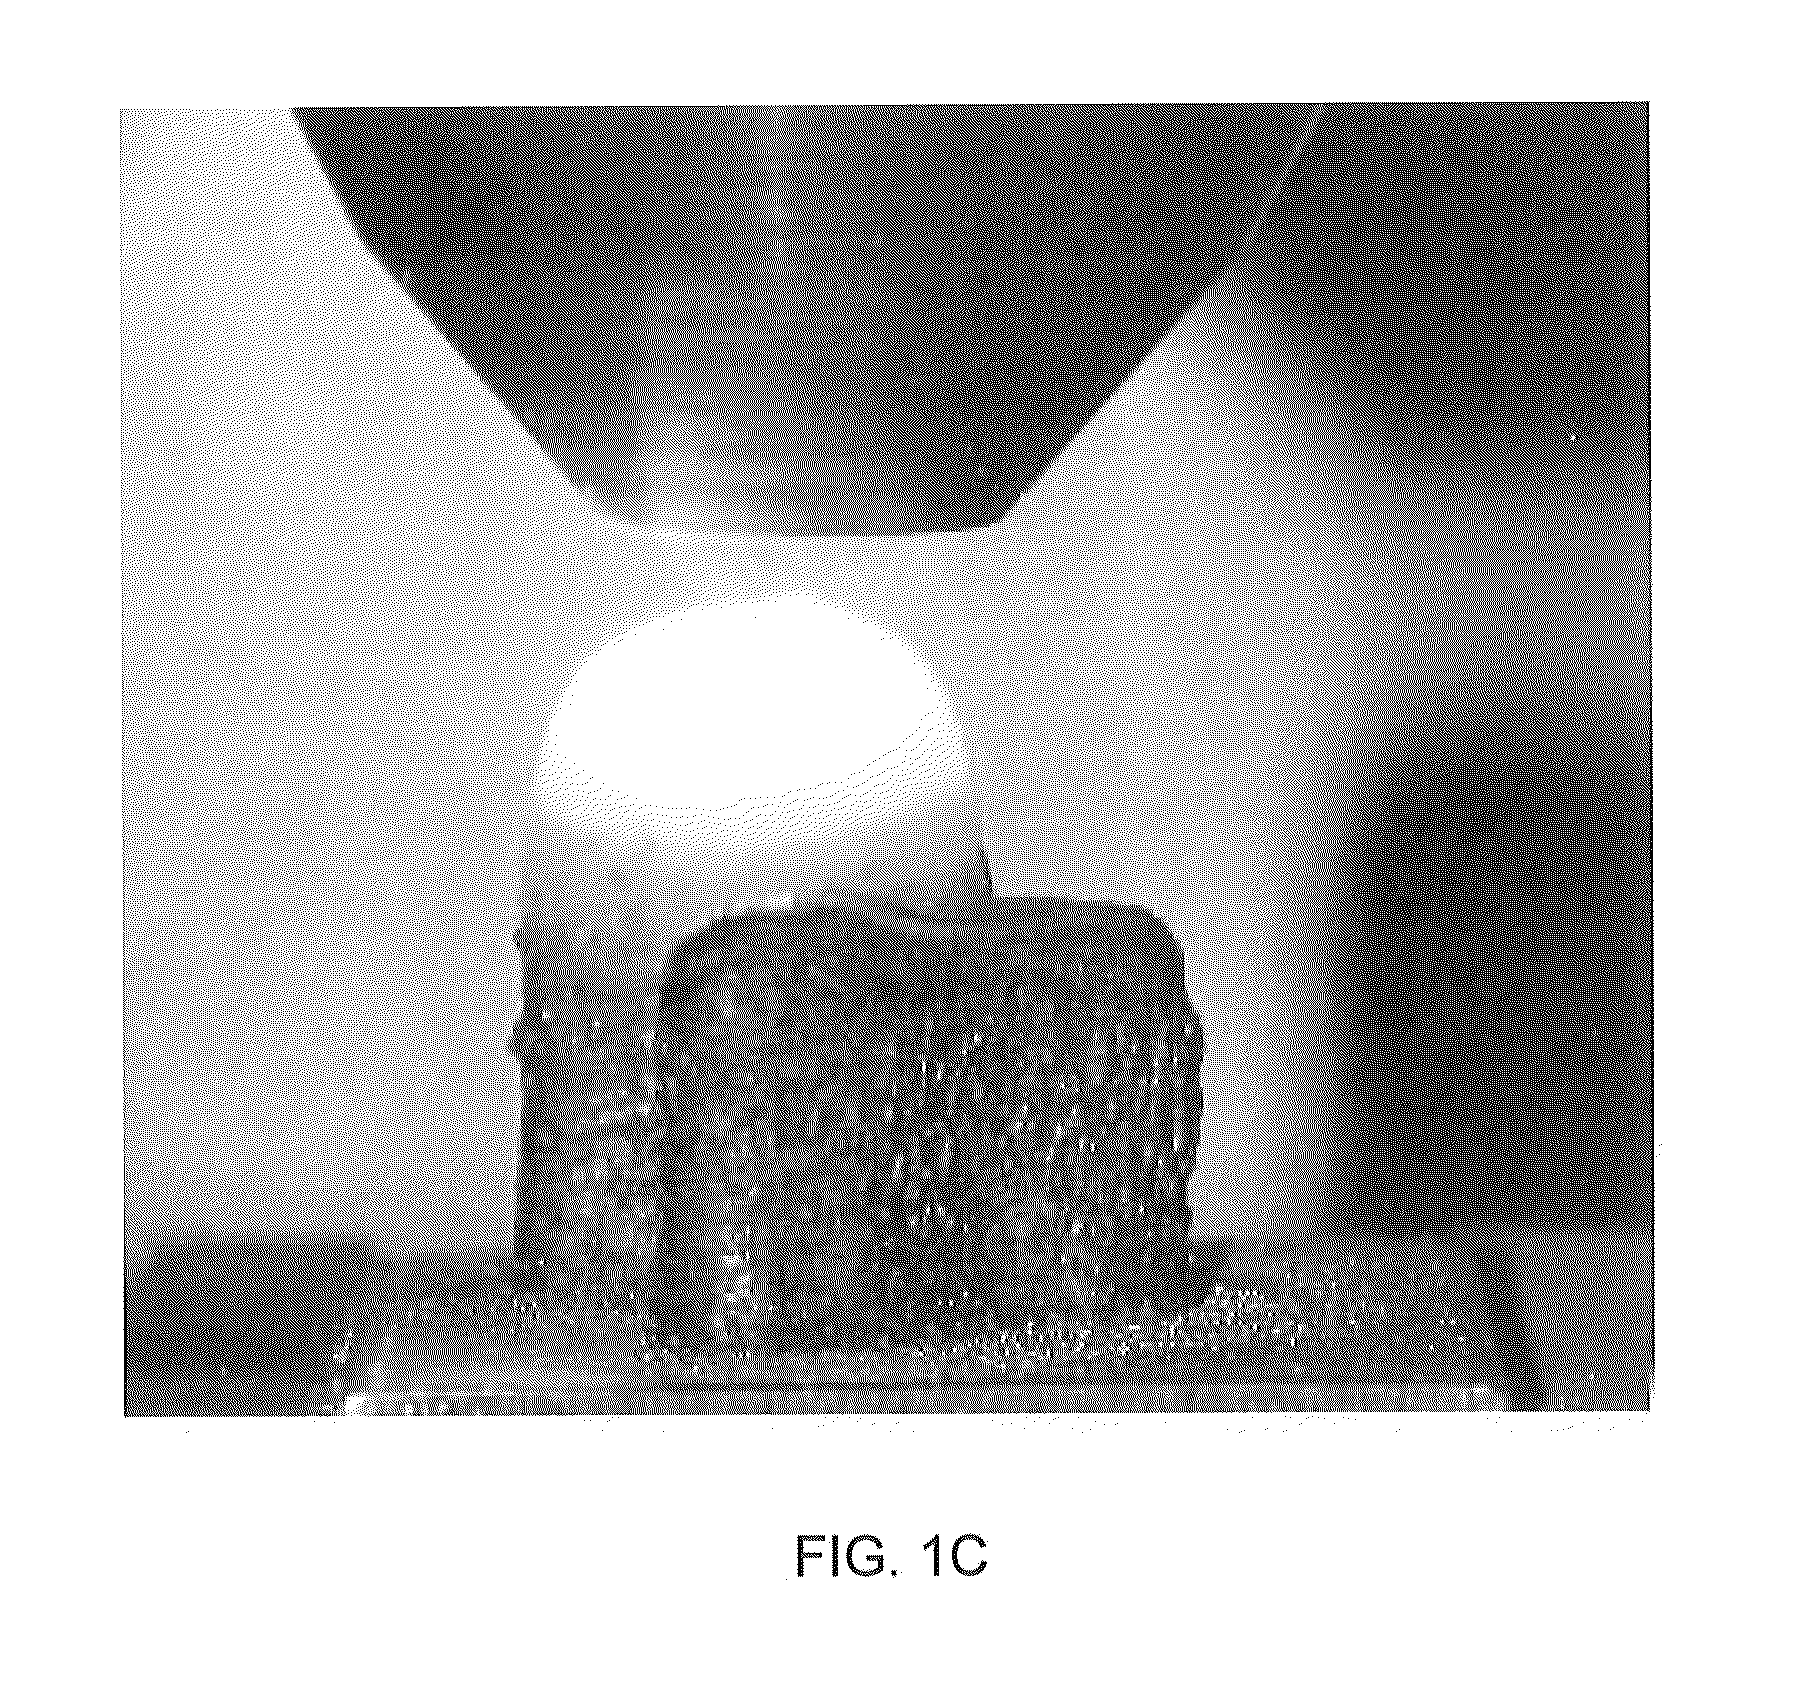 System and Method for Determining Beam Power Level Along an Additive Deposition Path